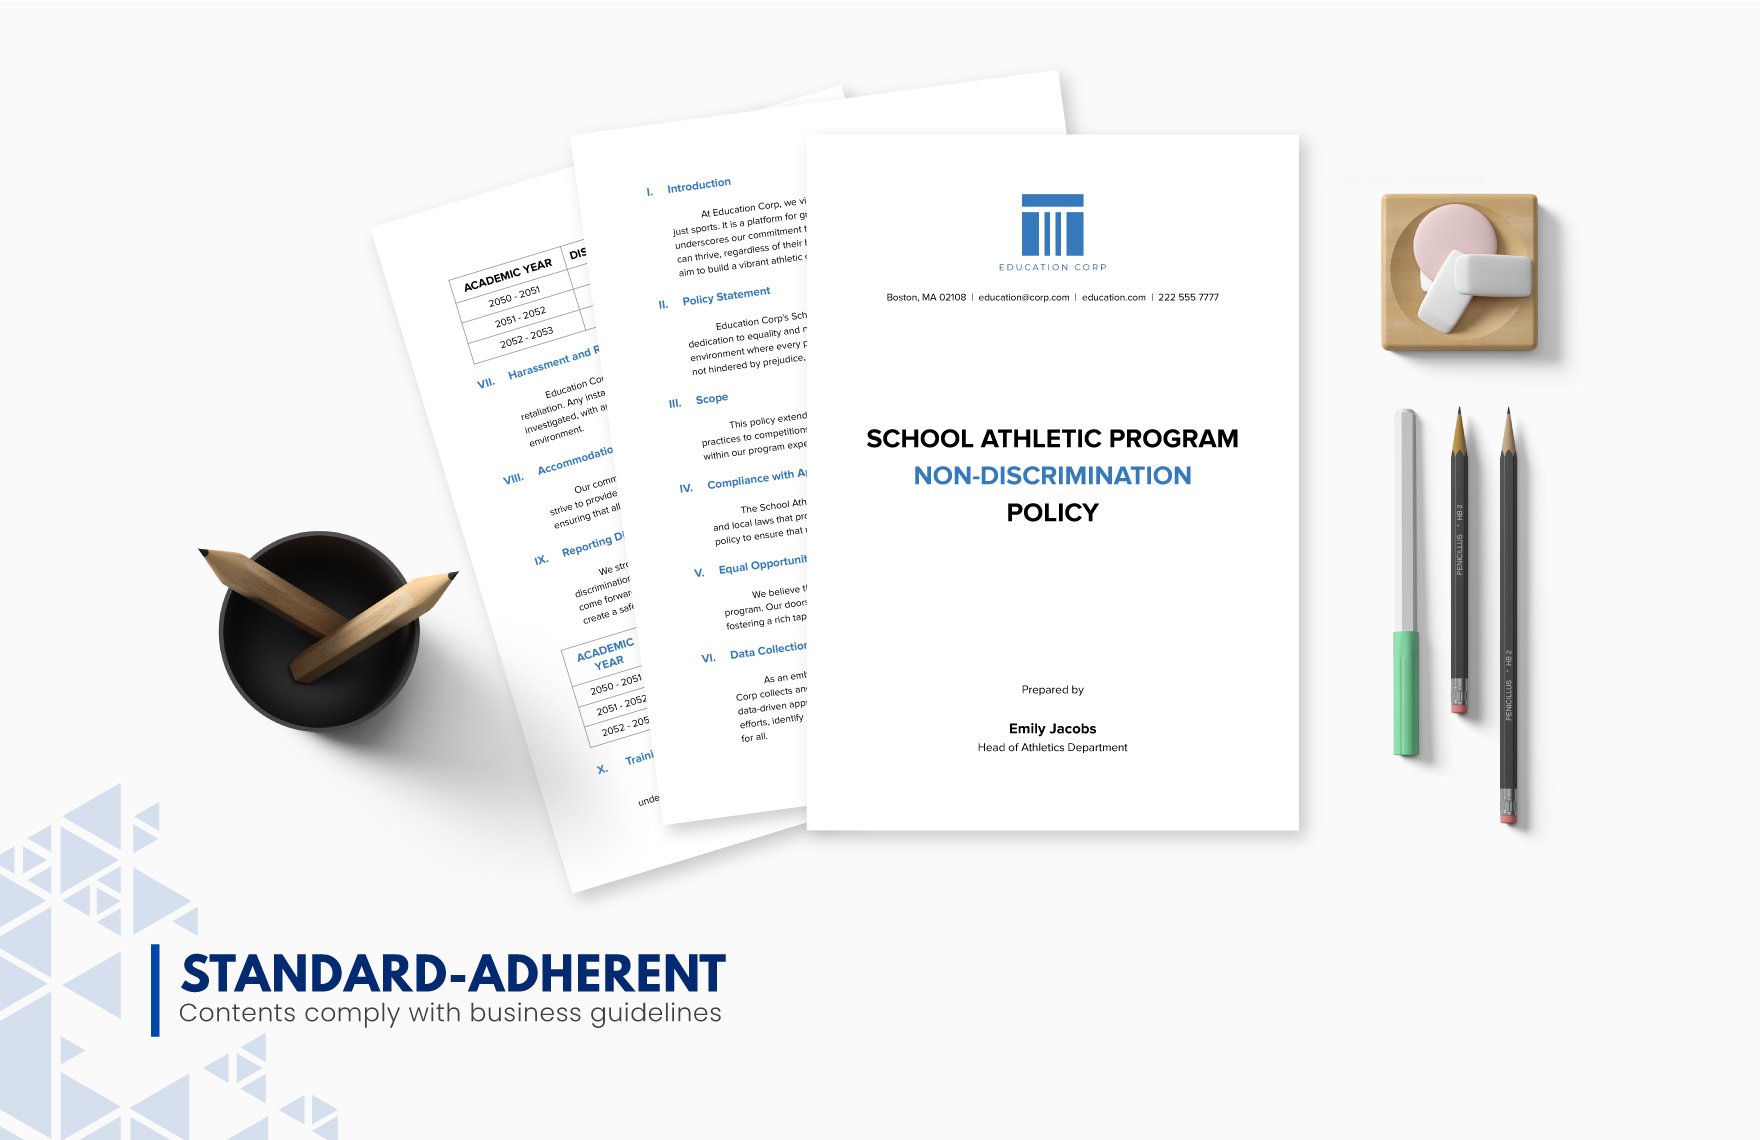 10 Education Compliance and Ethics Template Bundle